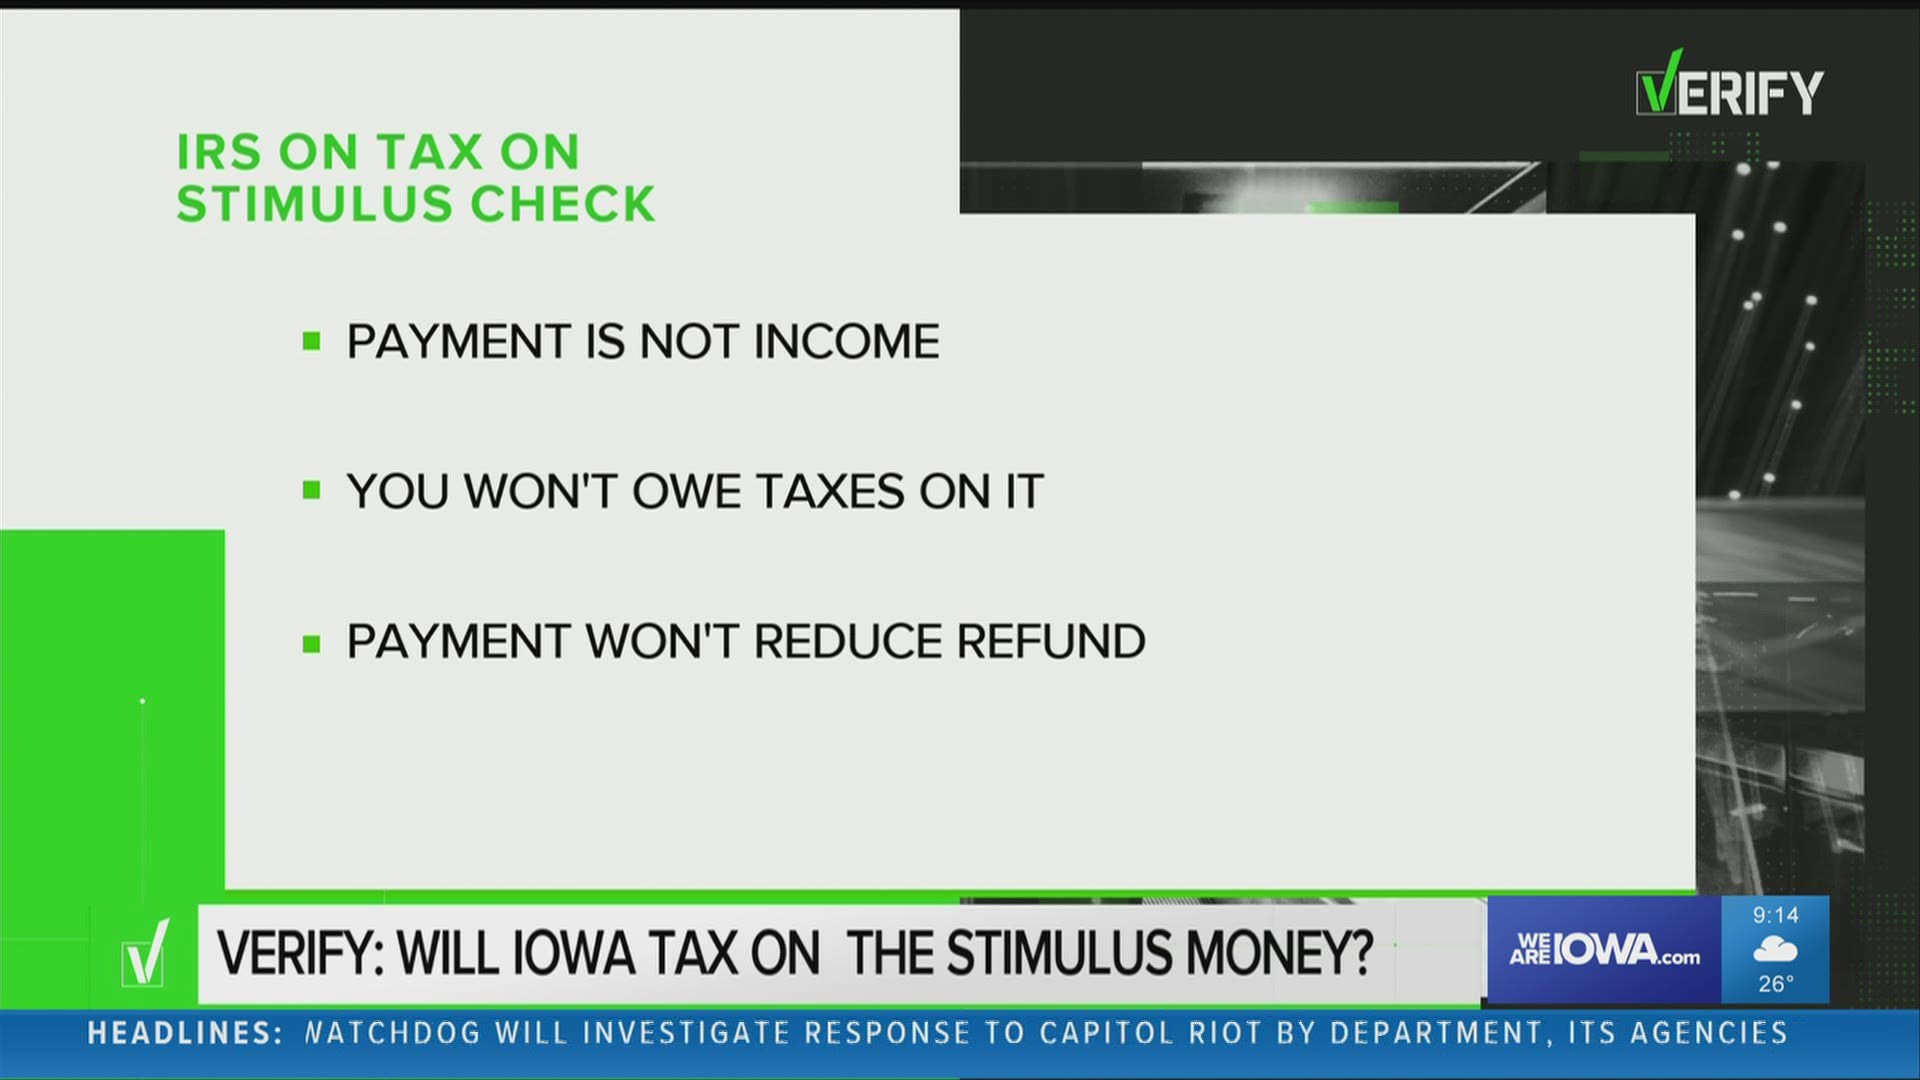 The IRS says that stimulus payments are not income so taxes will not be owed on them